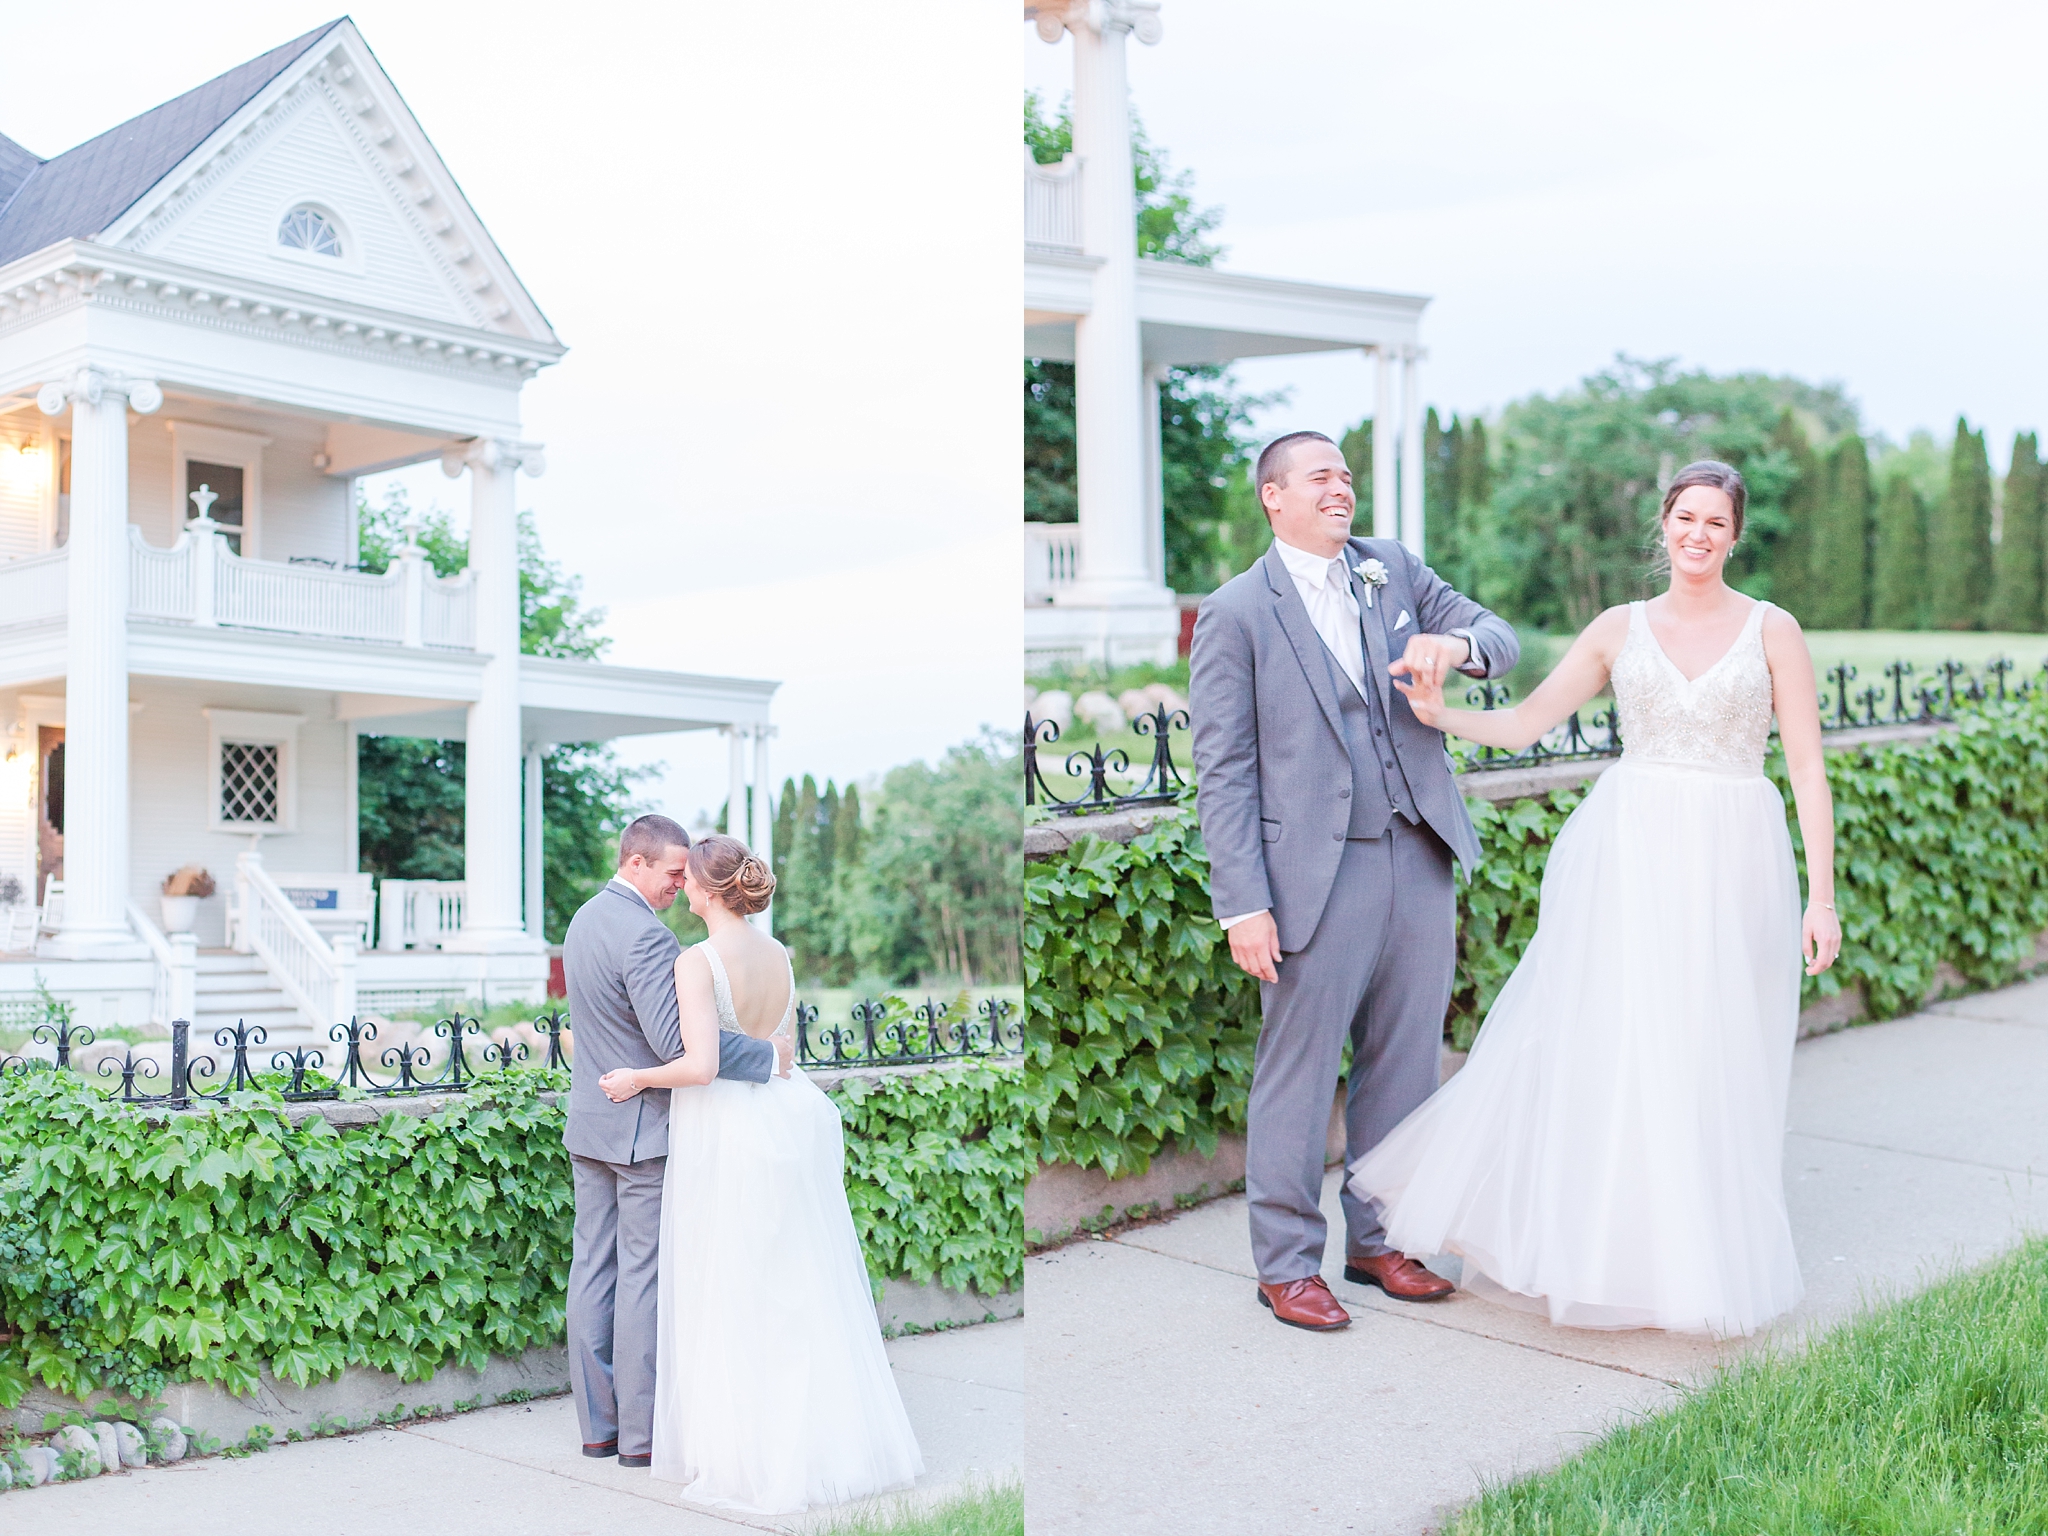 classic-intimate-fun-wedding-photos-at-the-meeting-house-grand-ballroom-in-plymouth-michigan-by-courtney-carolyn-photography_0098.jpg